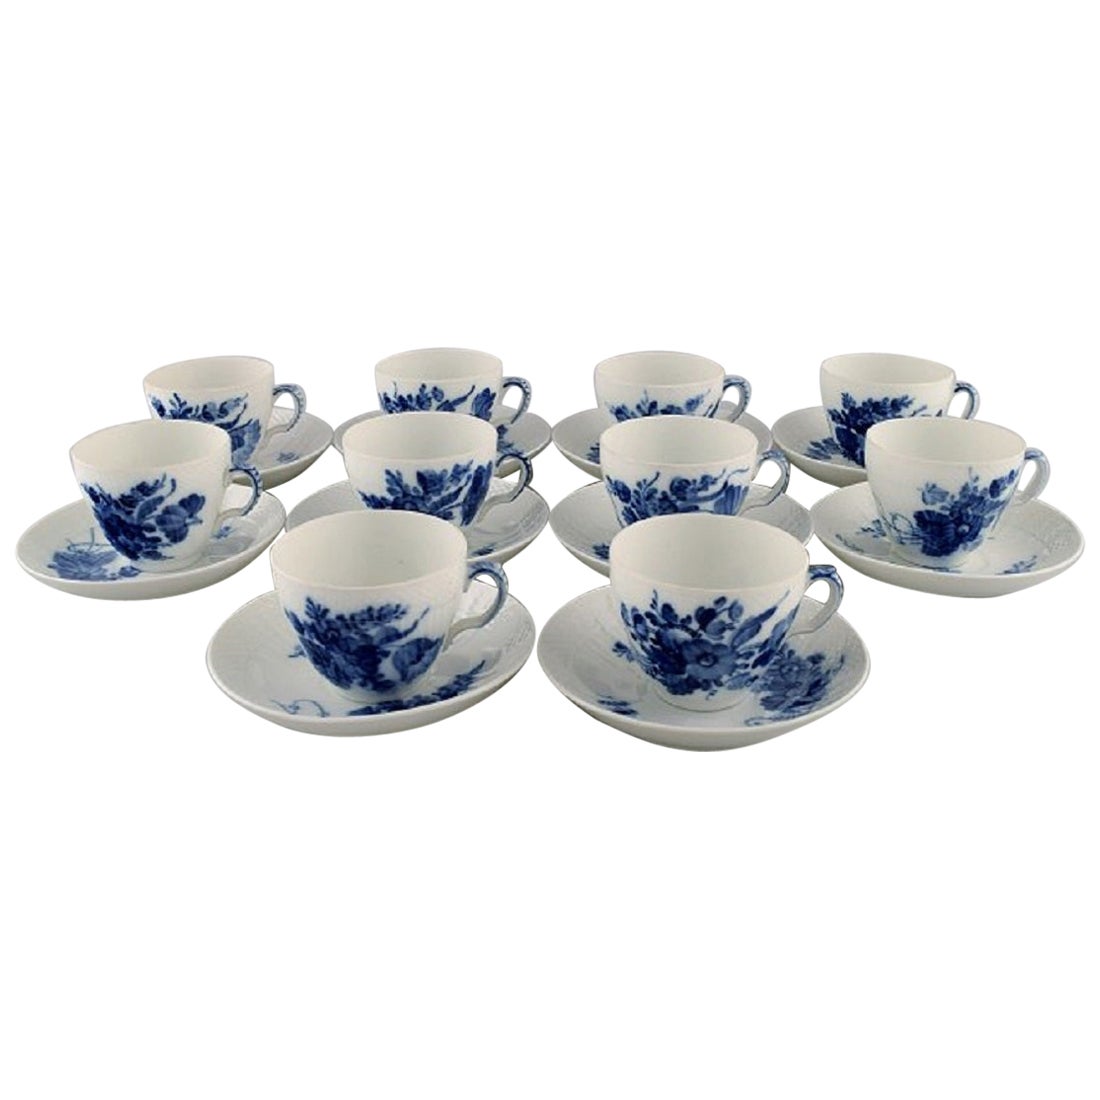 10 Royal Copenhagen Blue Flower Curved Coffee Cups with Saucers, 1960s For Sale